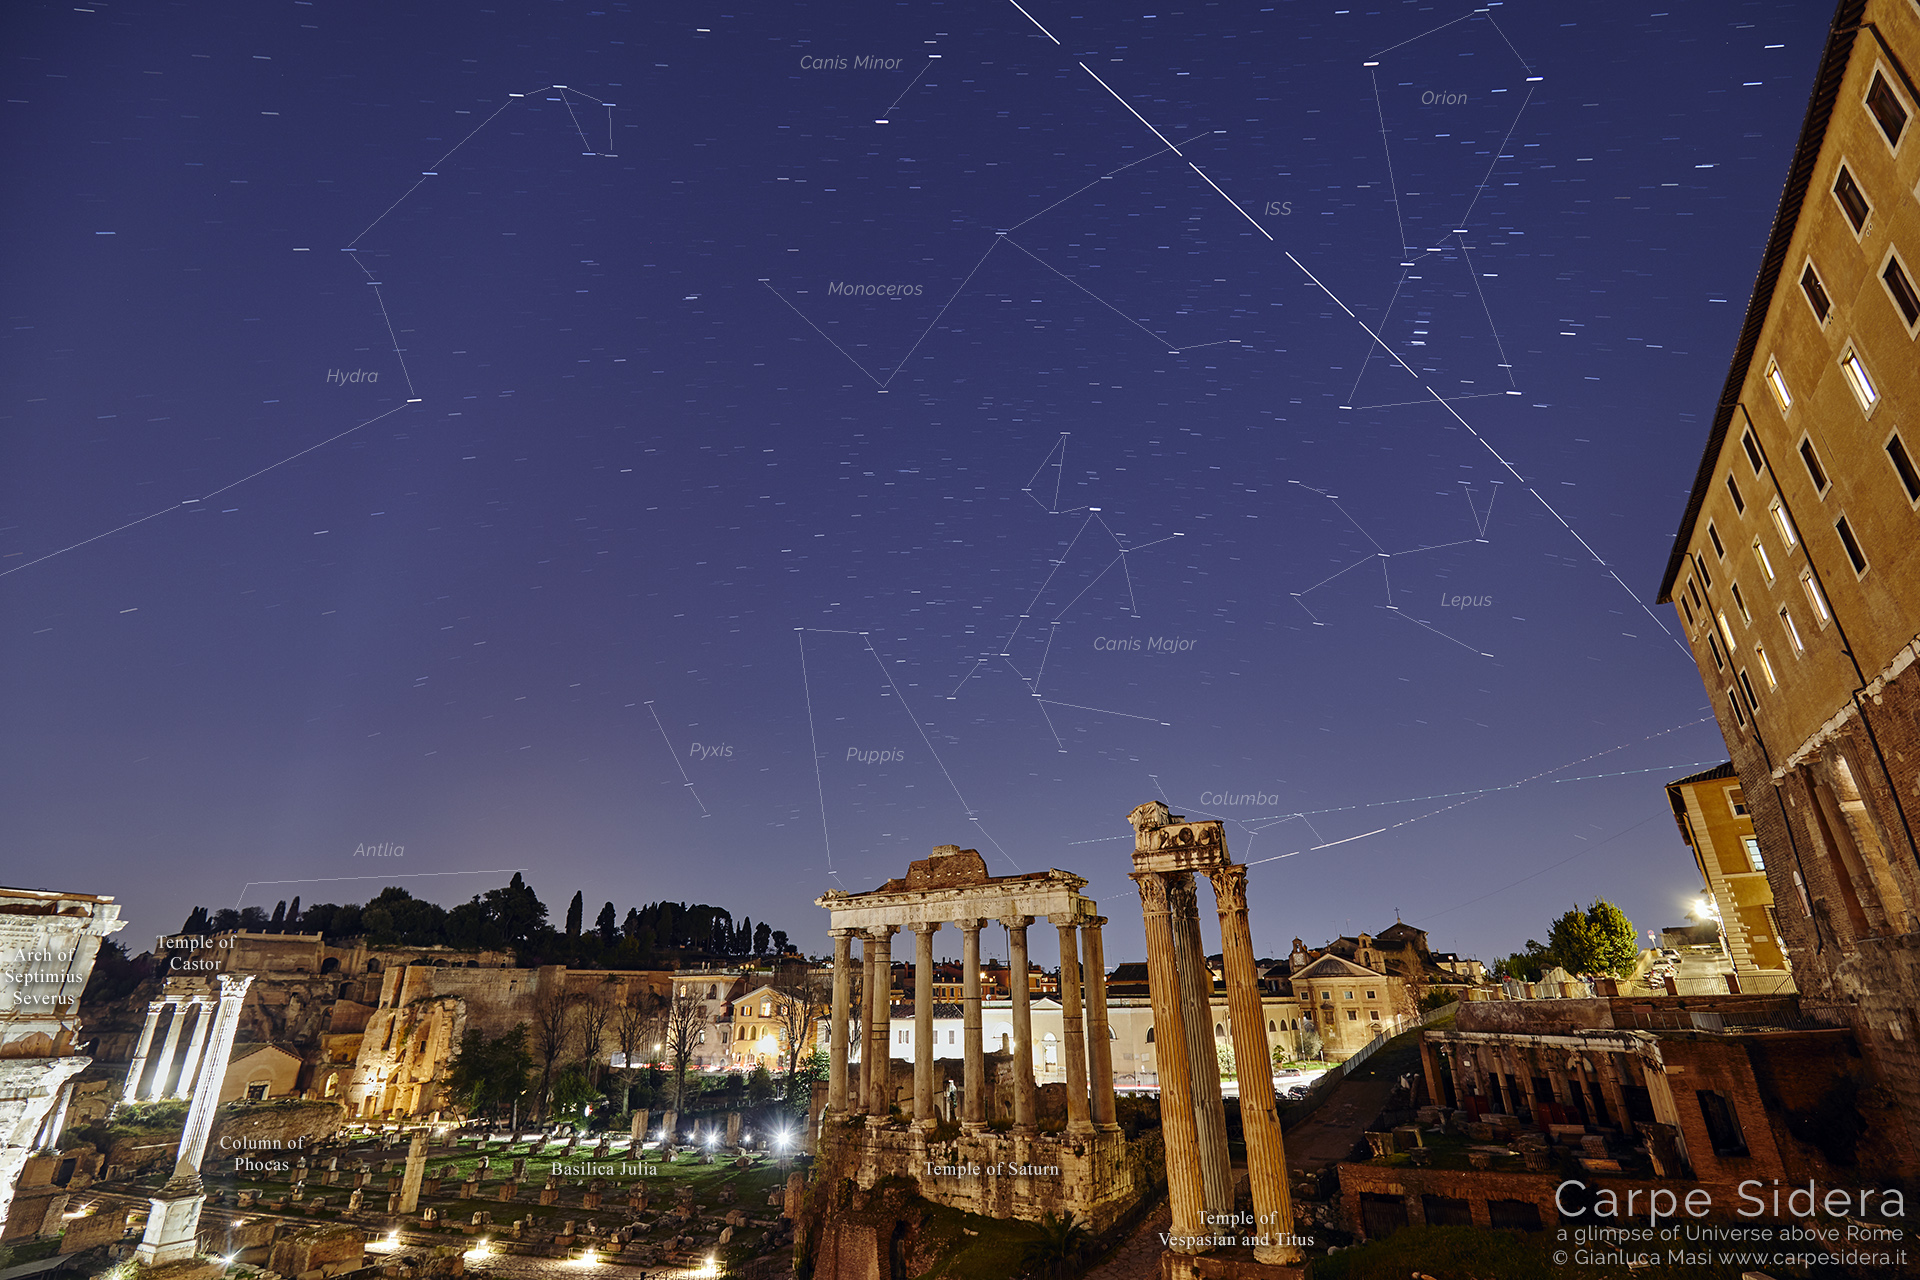 The International Space Station crosses the sky above the Roman Forum: constellations and main monuments are labelled - 22 Mar. 2019